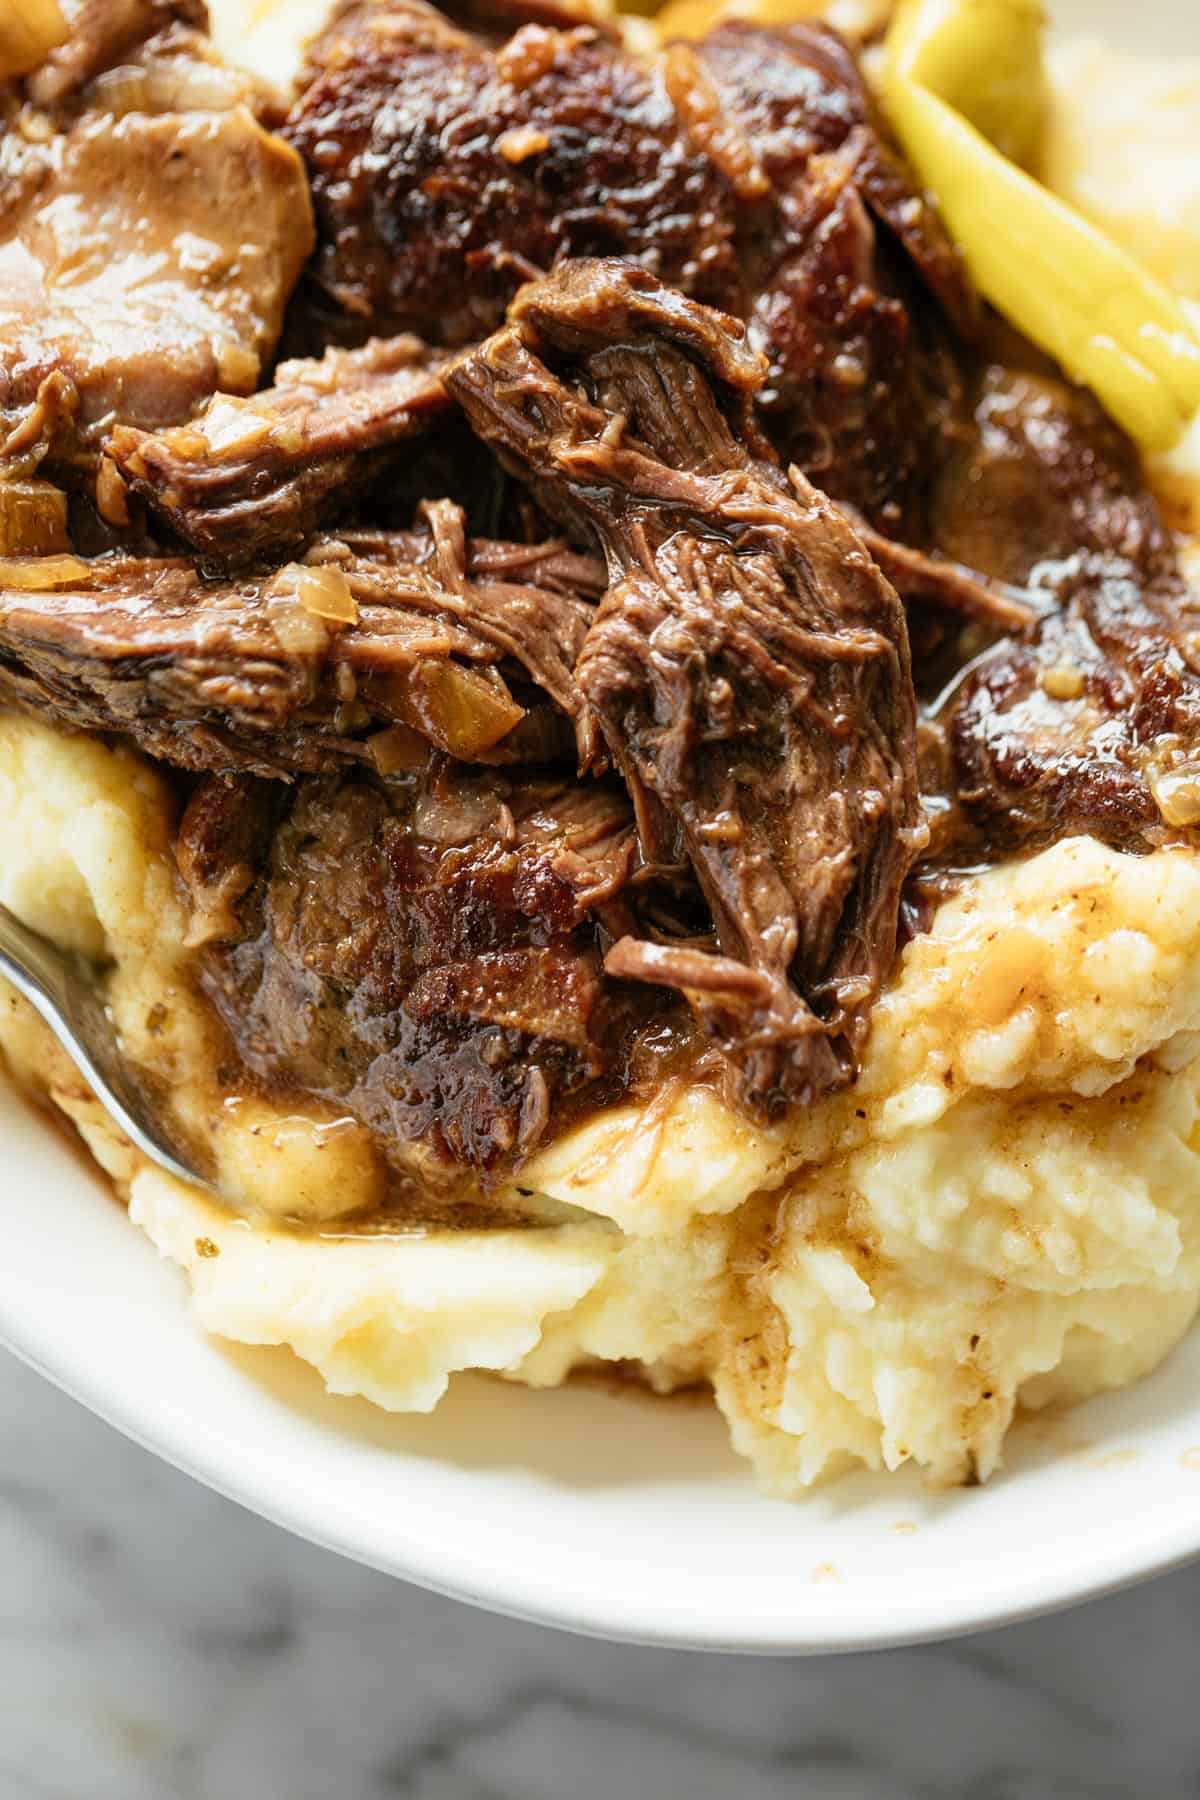 Mississippi Pot Roast shredded into pieces and served in a white bowl over mashed potatoes. | craveitall.com